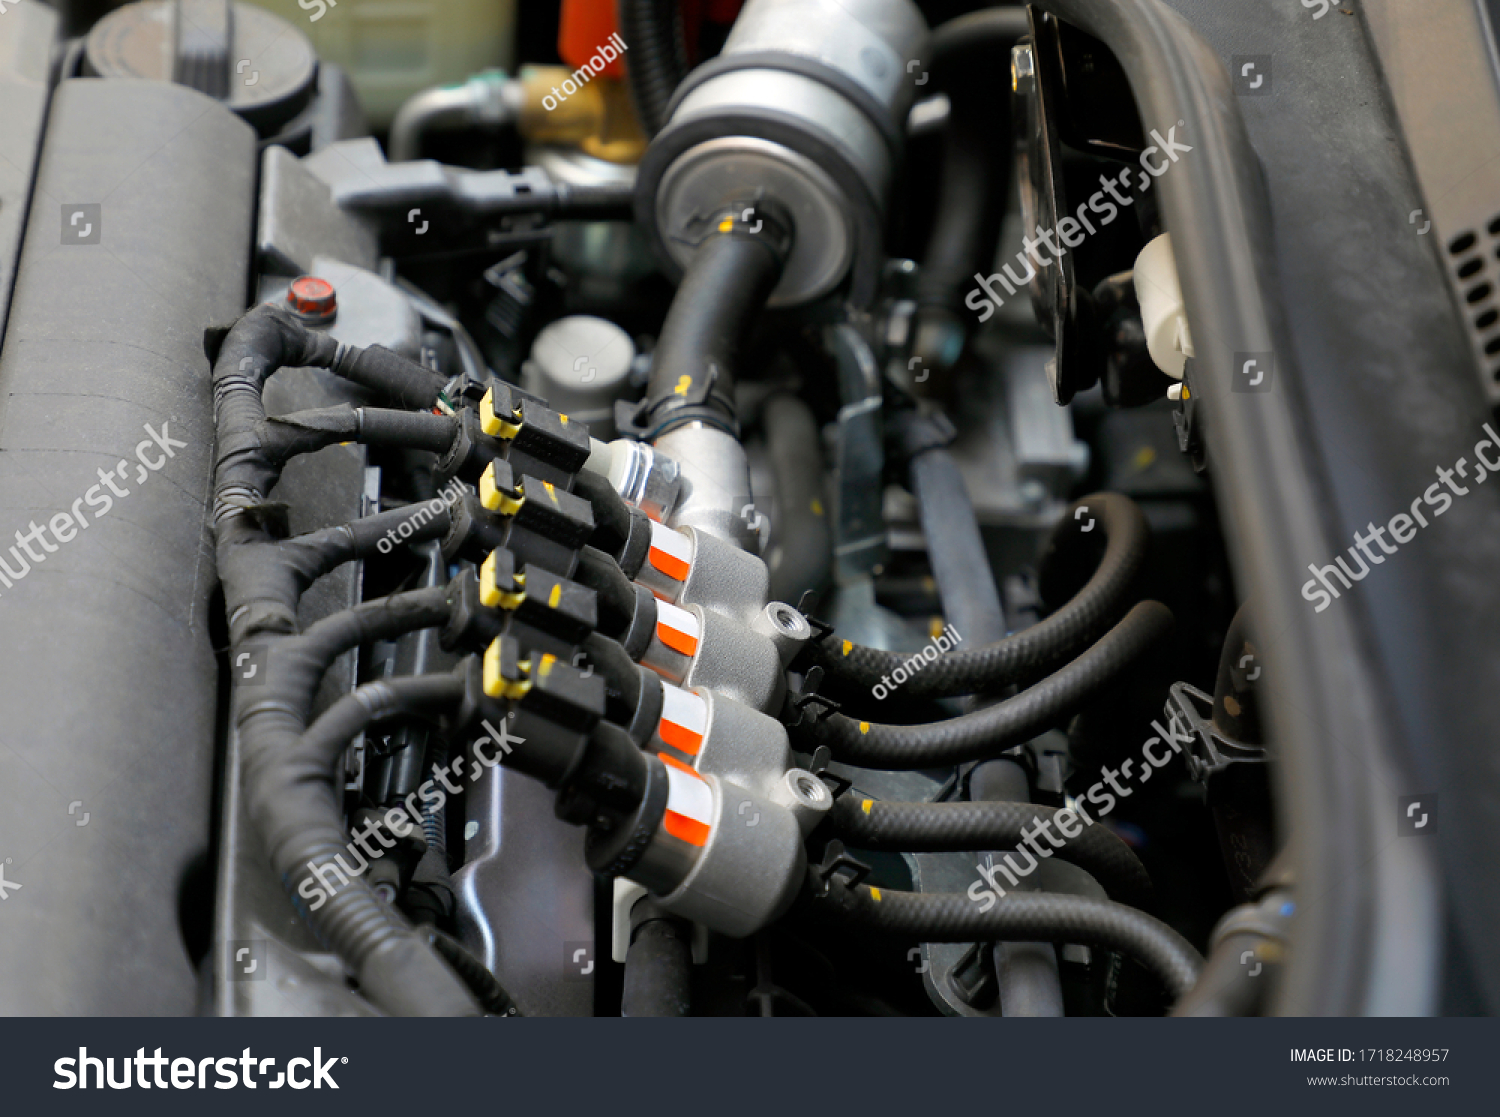 Car engine sequential gas injection. lpg car injectors in car engine need to service, gas injector installed in gasoline engine to use cheaper alternative fuel. #1718248957